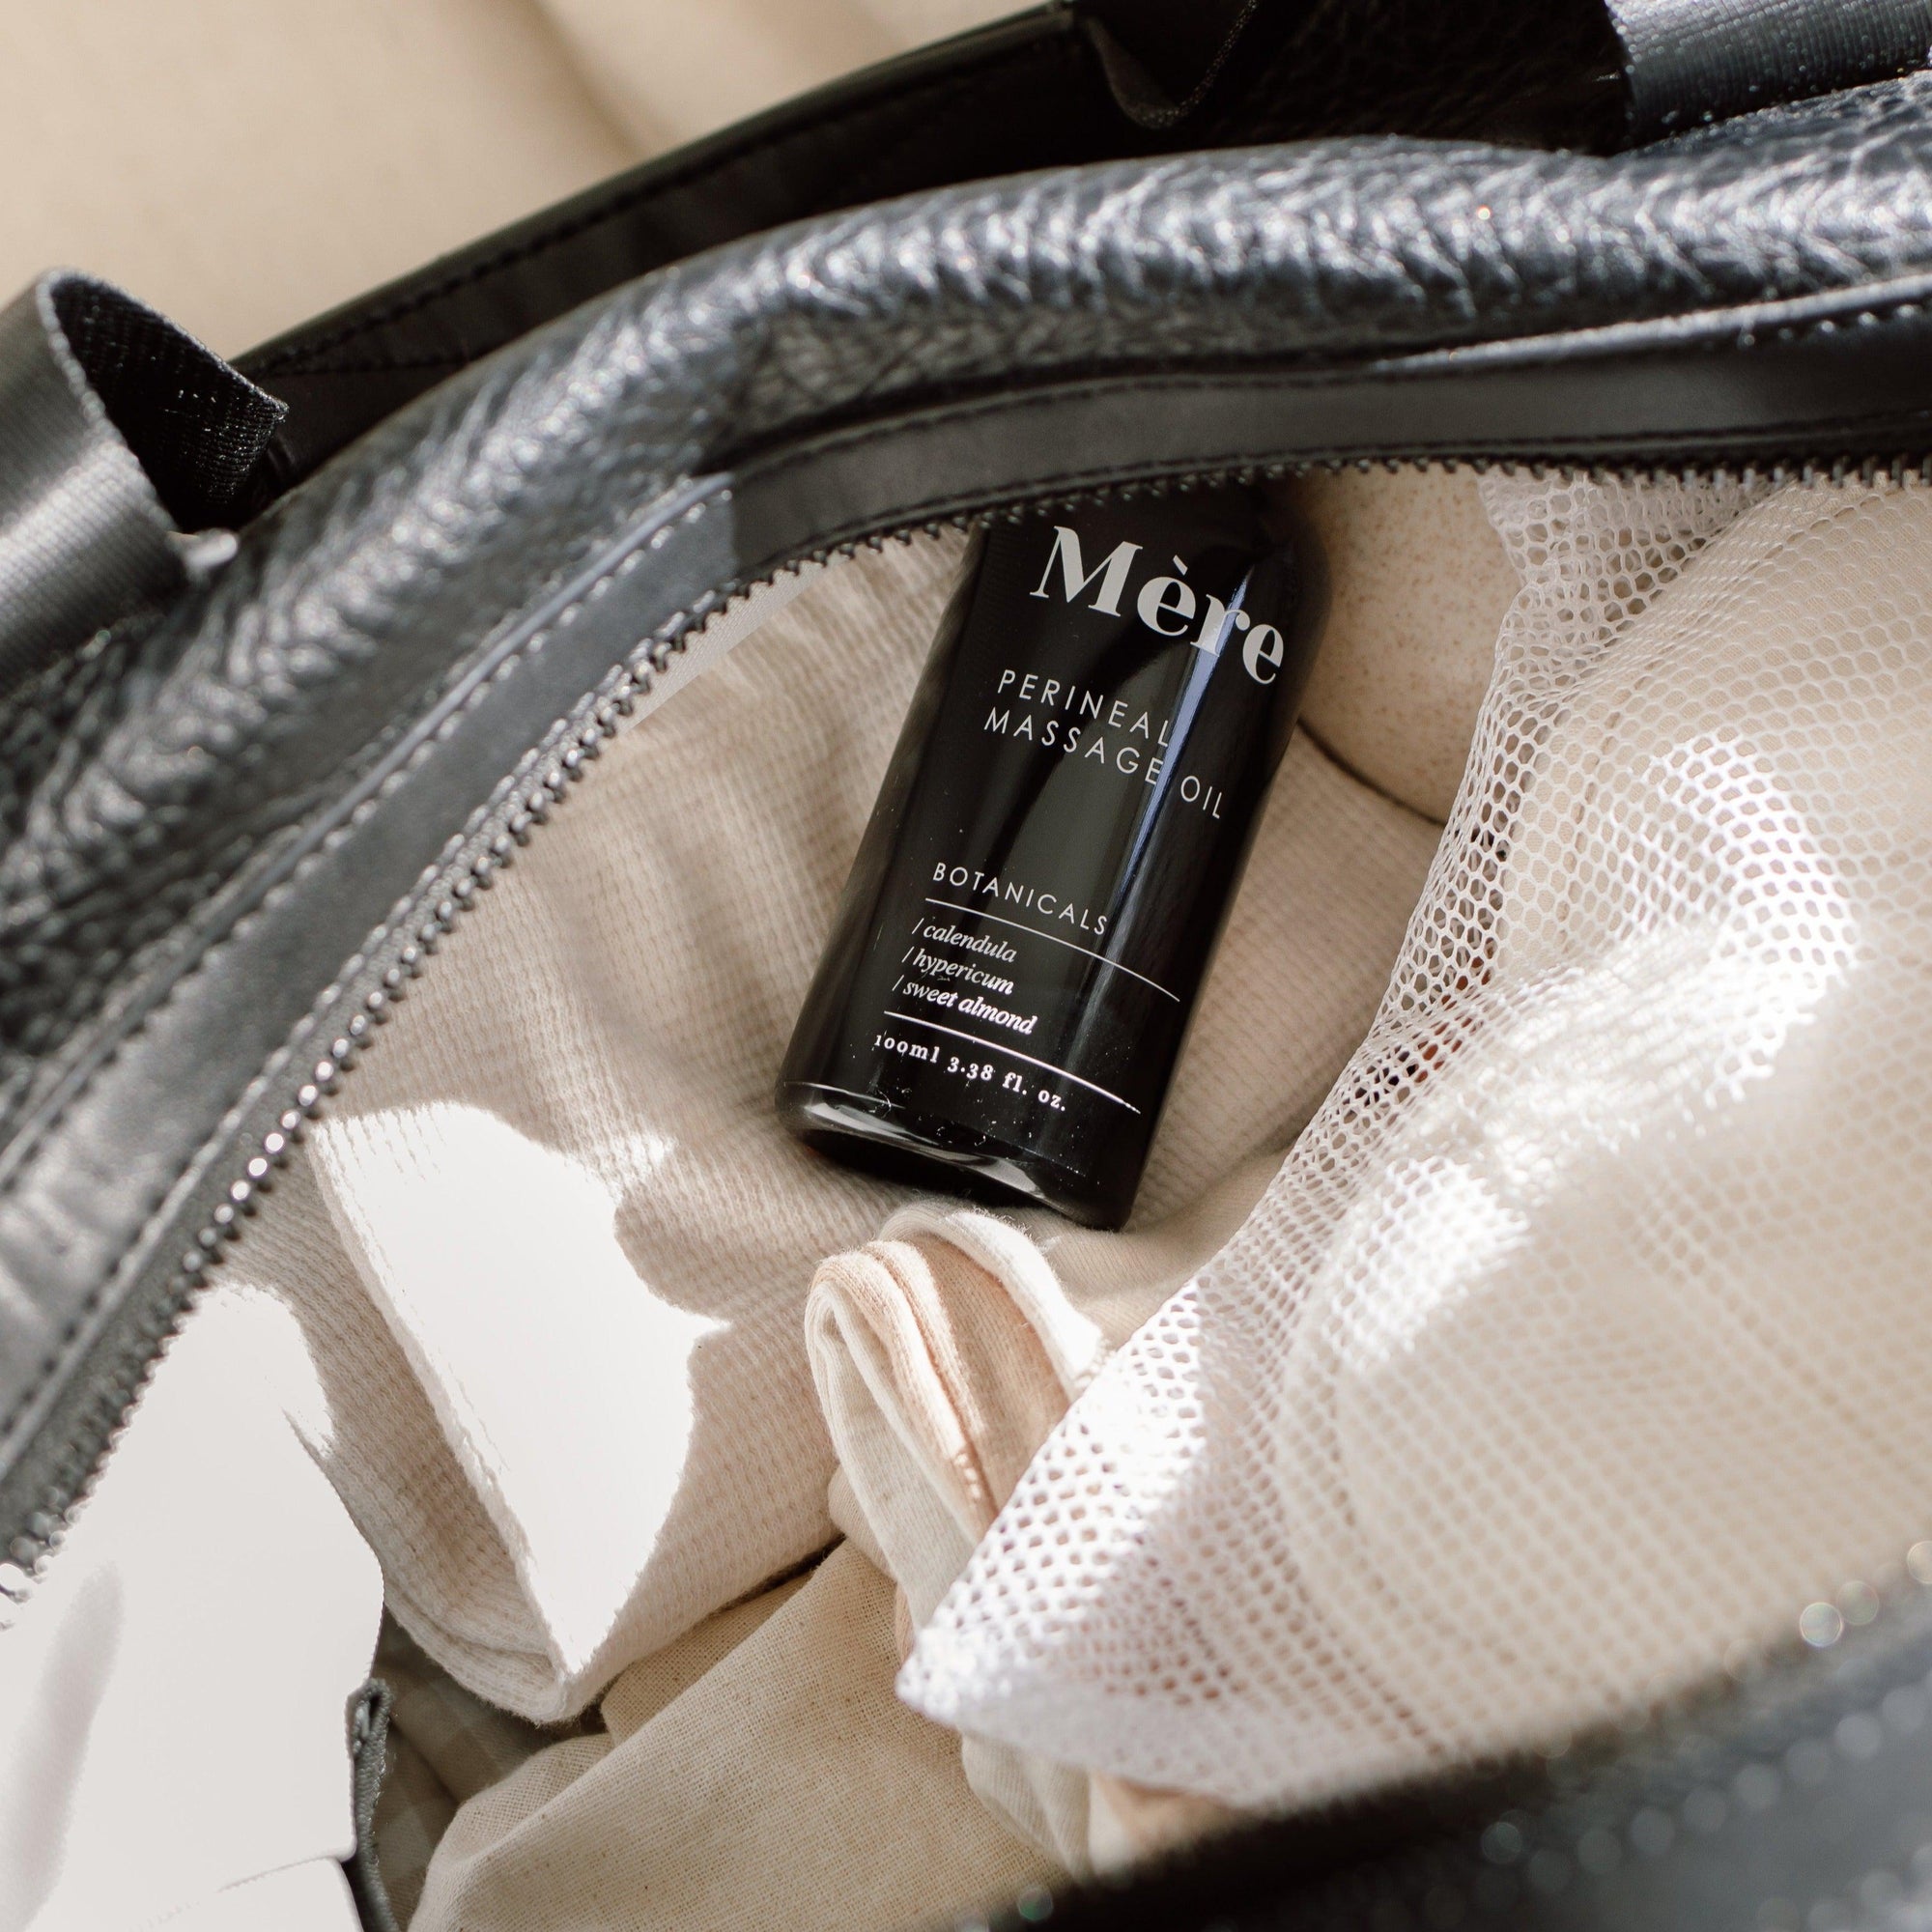 A black bag containing a bottle of Mère Perineal Massage Oil.